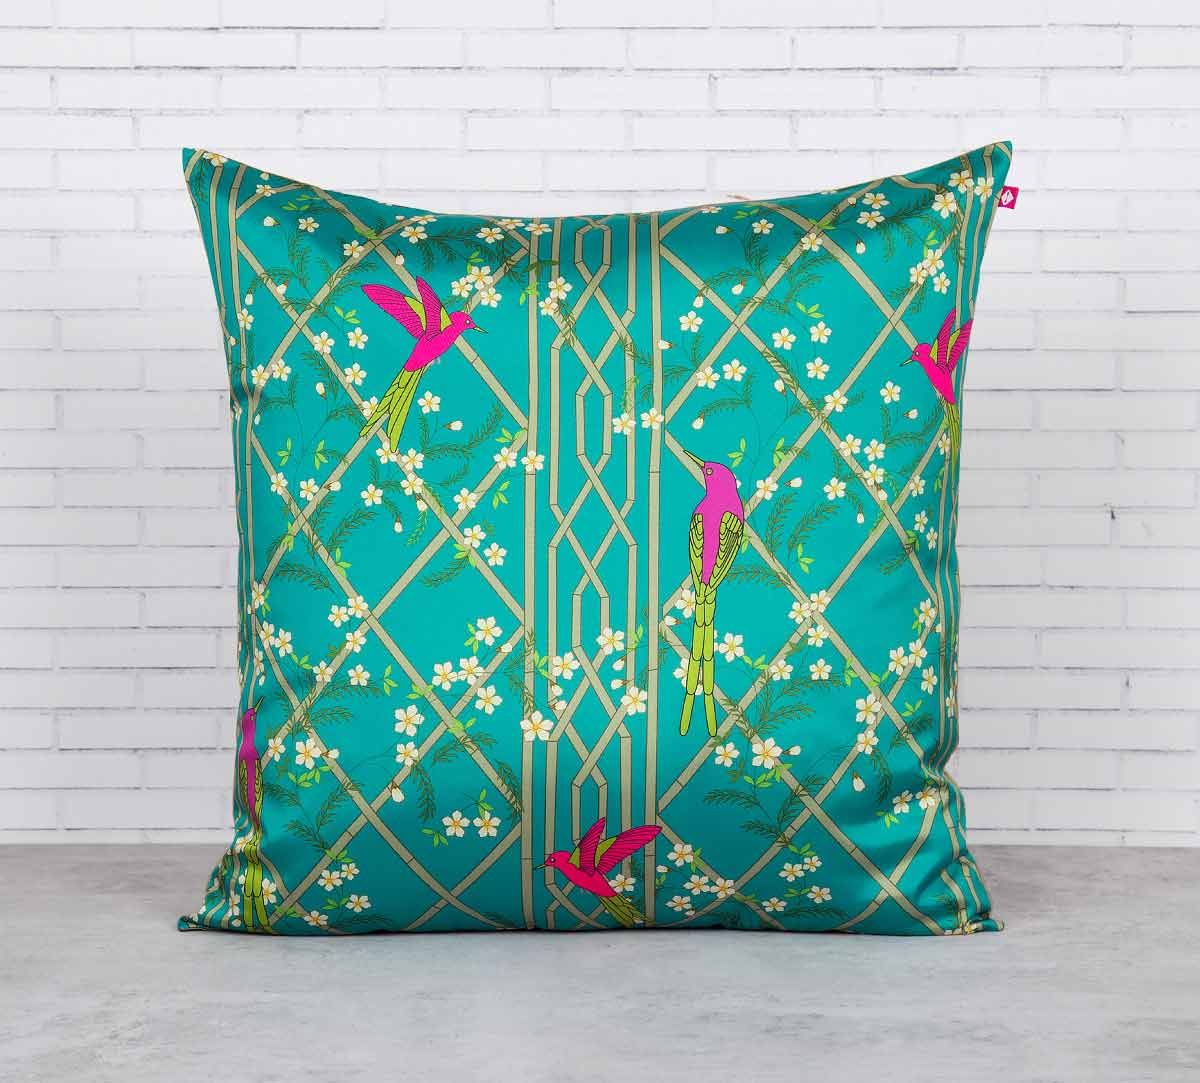 India Circus The Rose finchs Window View Blended Taf Silk Cushion Cover